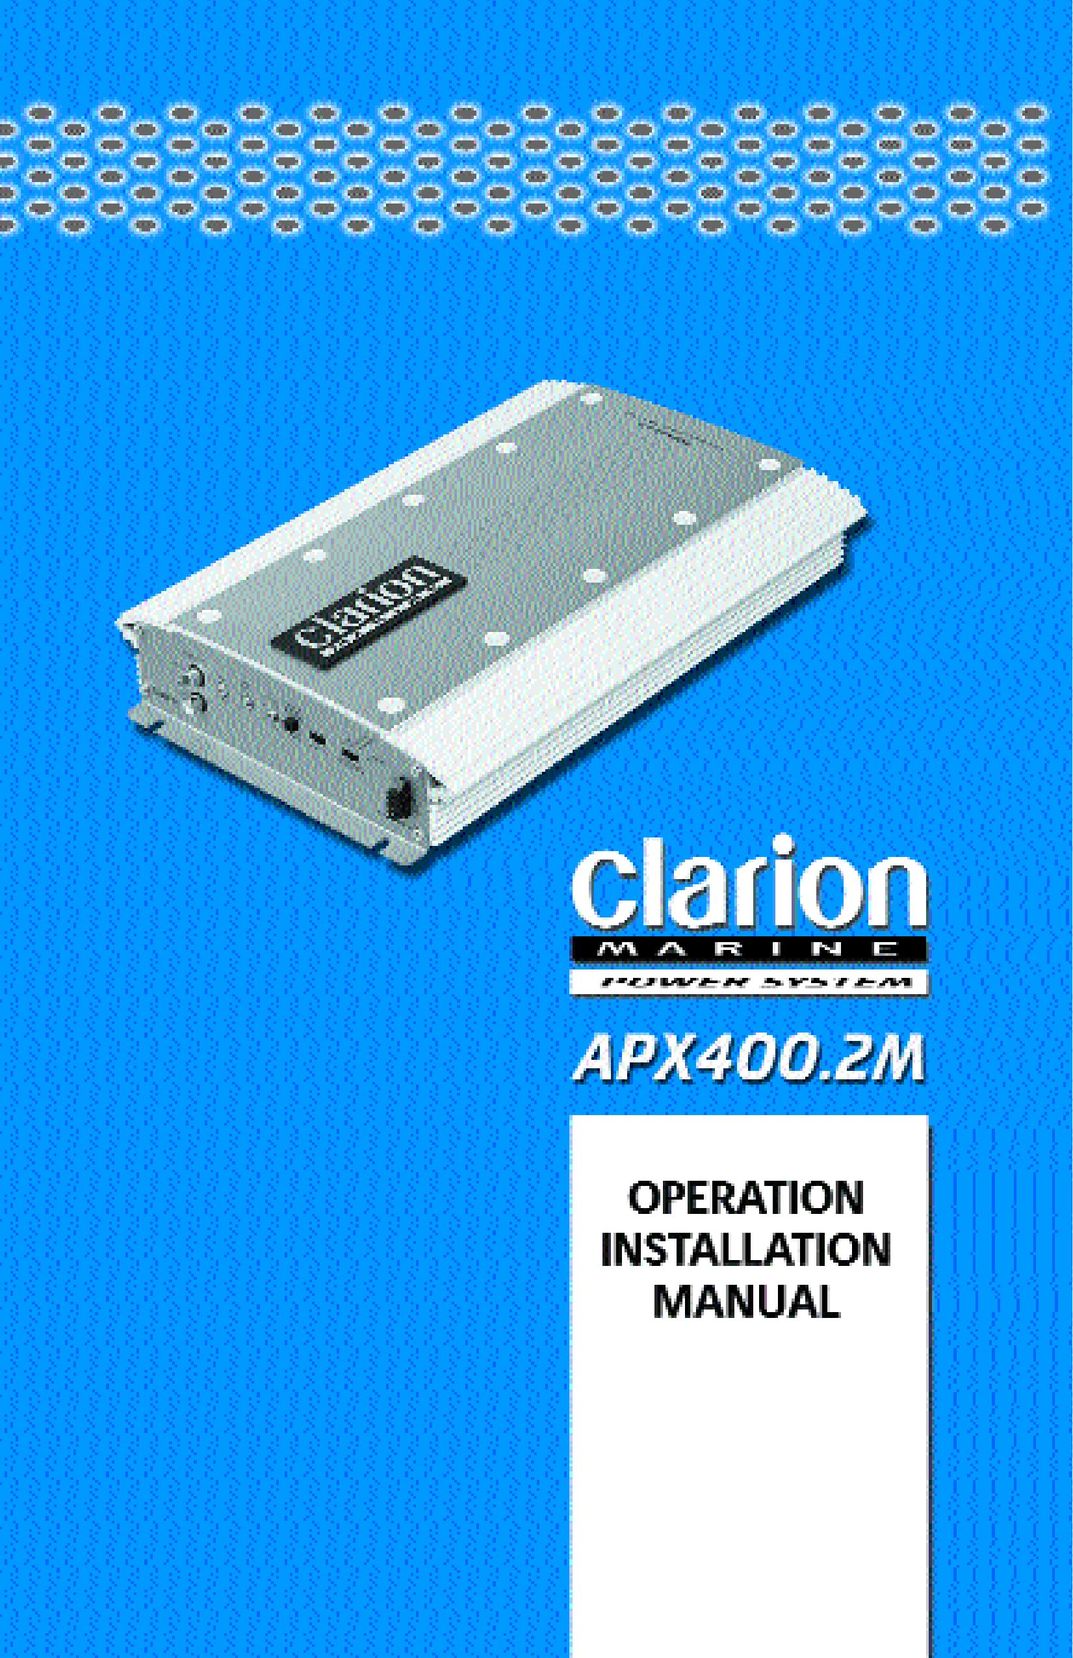 Clarion APX400.2M Stereo Amplifier User Manual